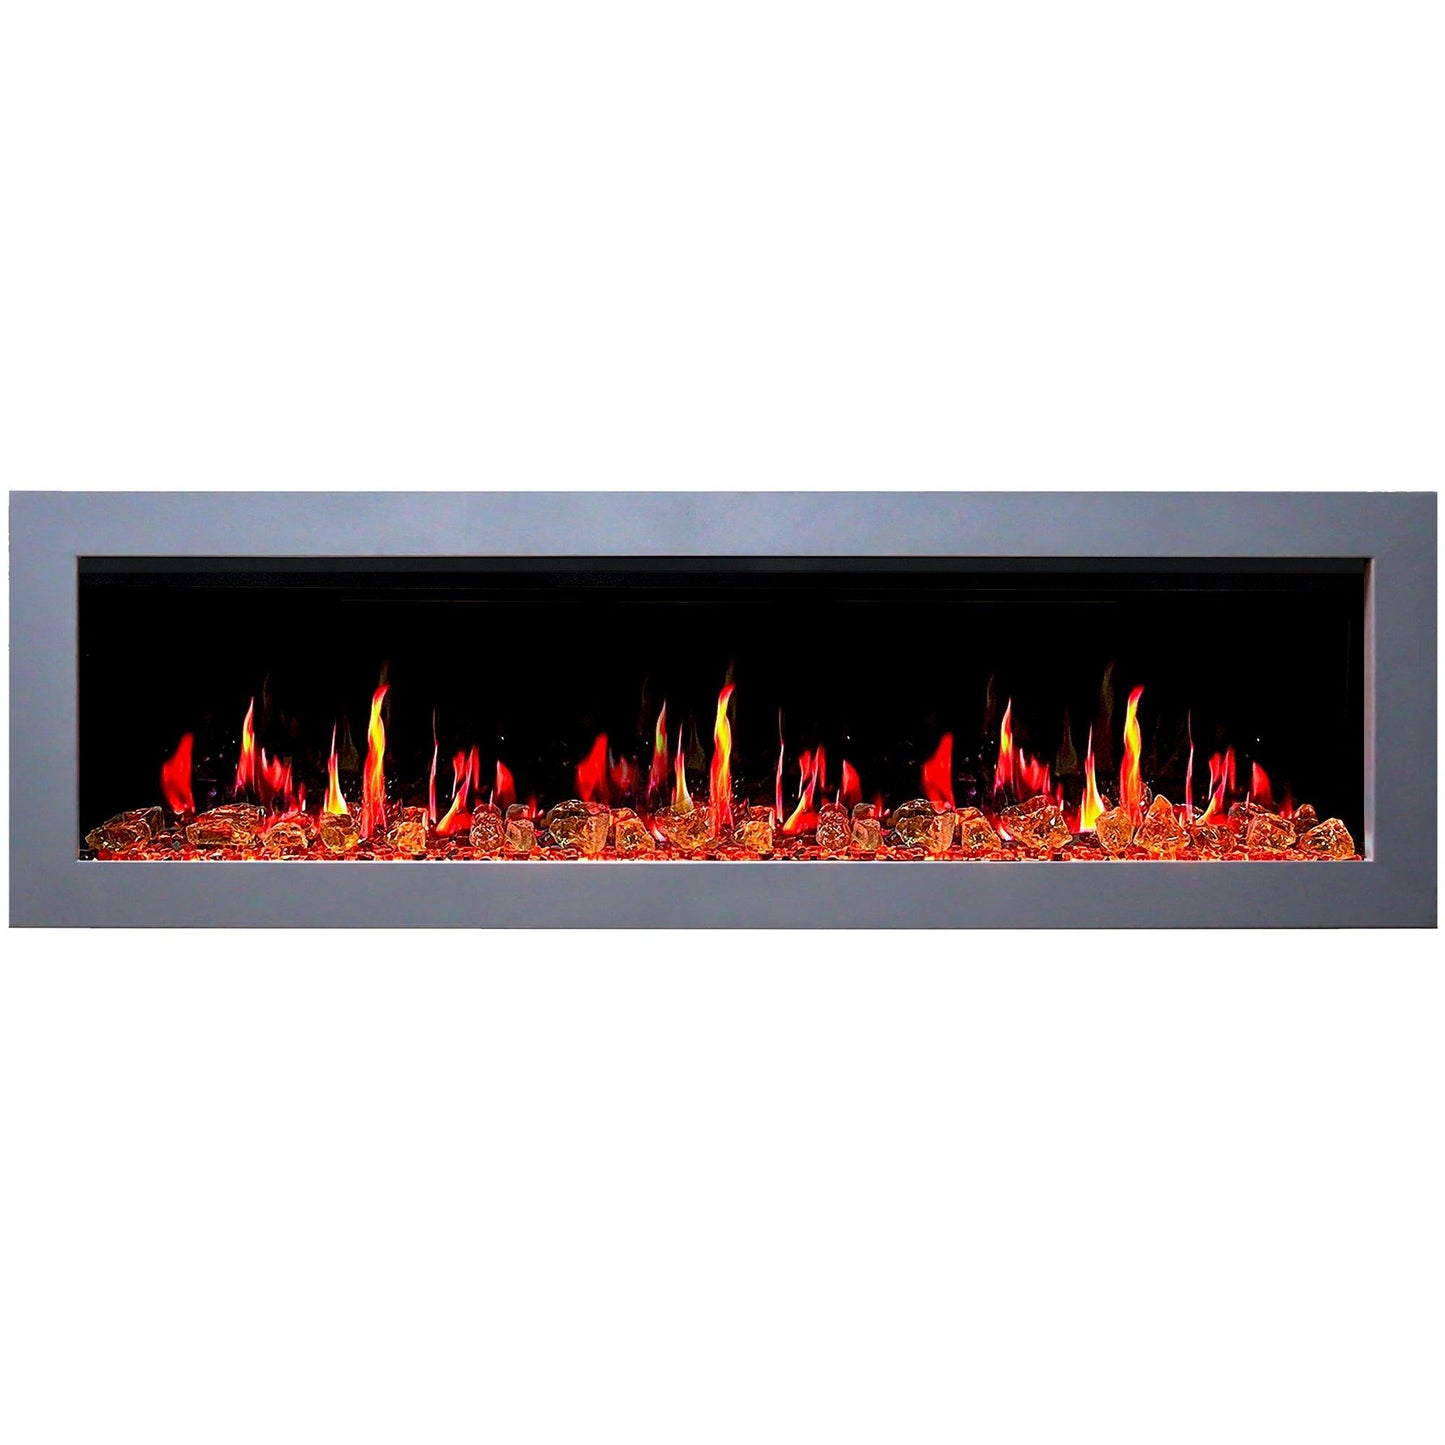 ZopaFlame™ 78" Linear Wall-mount Electric Fireplace - SG19788V - ZopaFlame Fireplaces